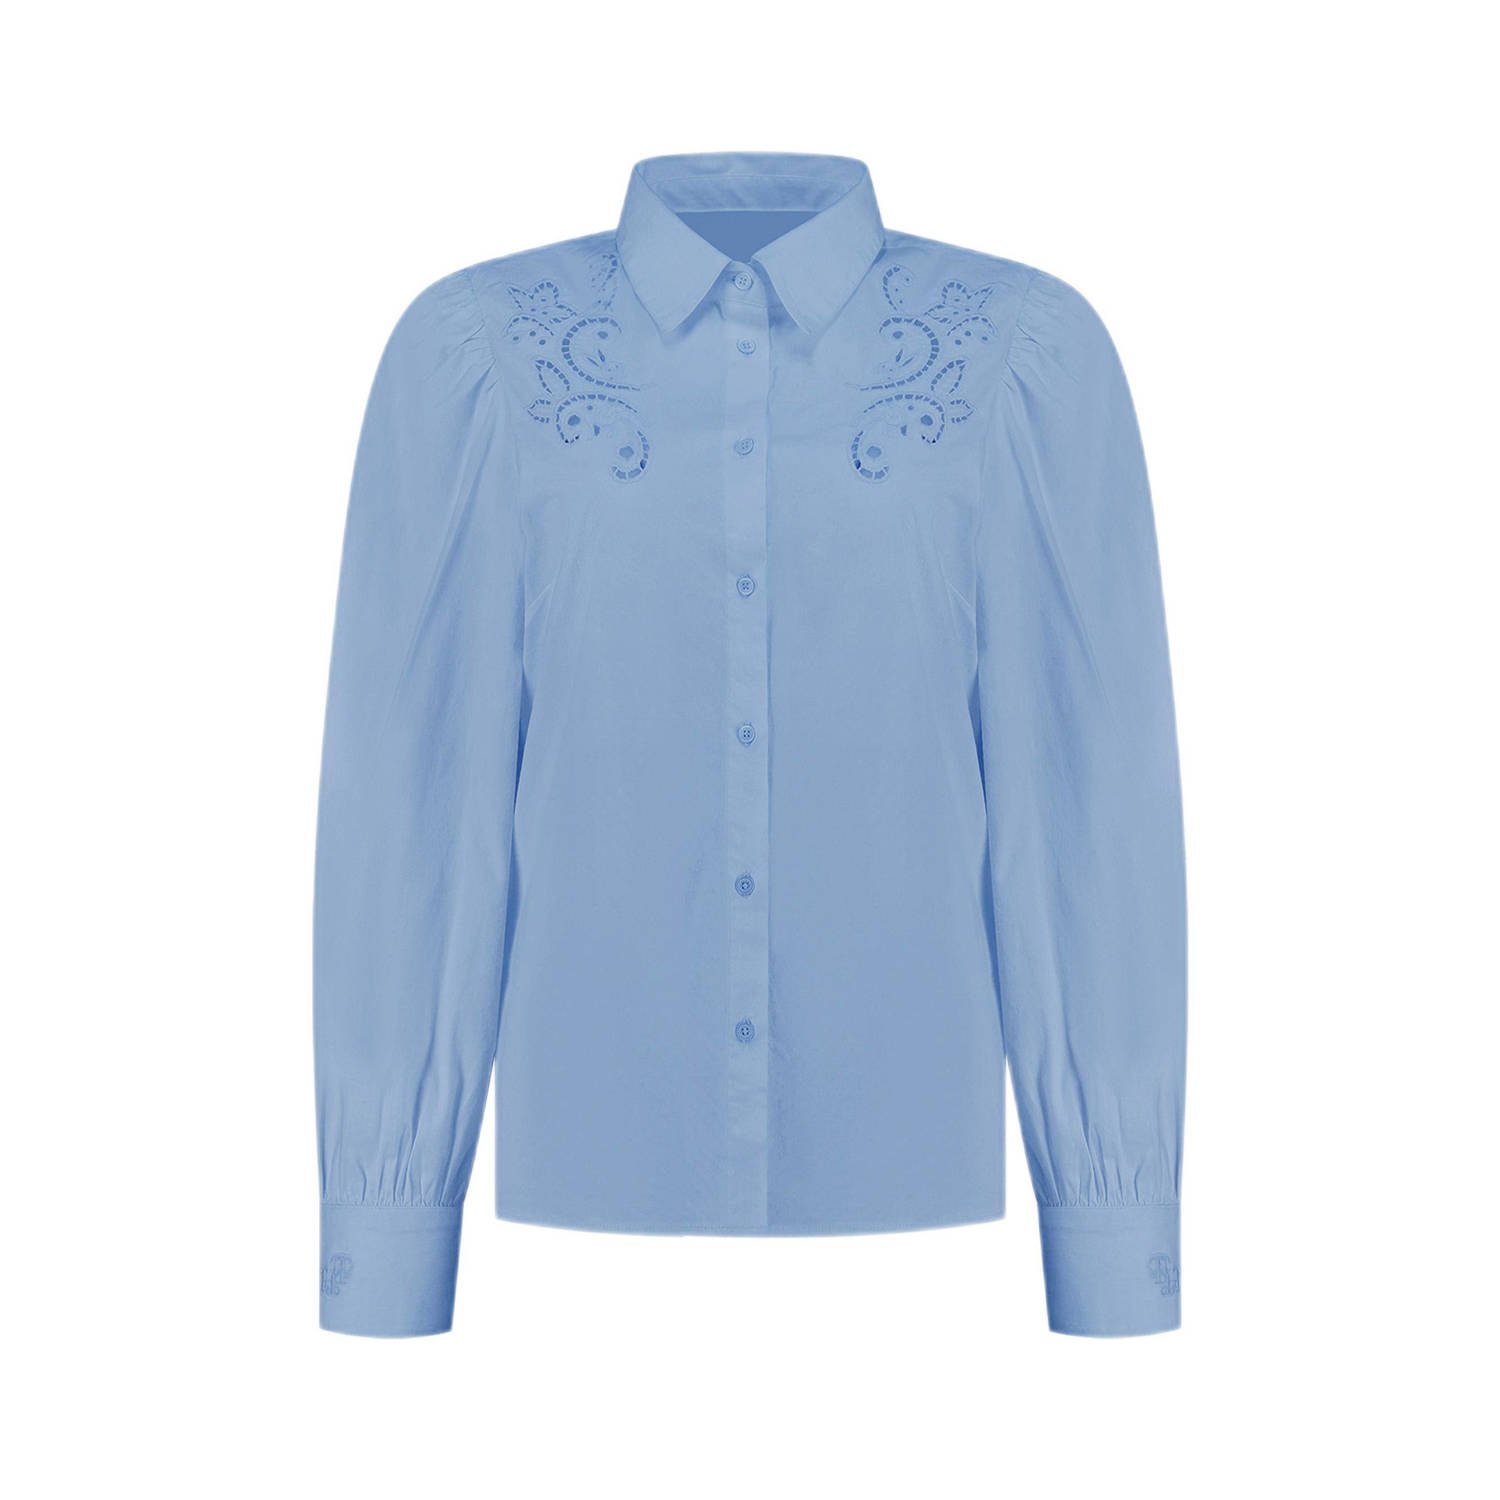 Fifth House blouse blauw